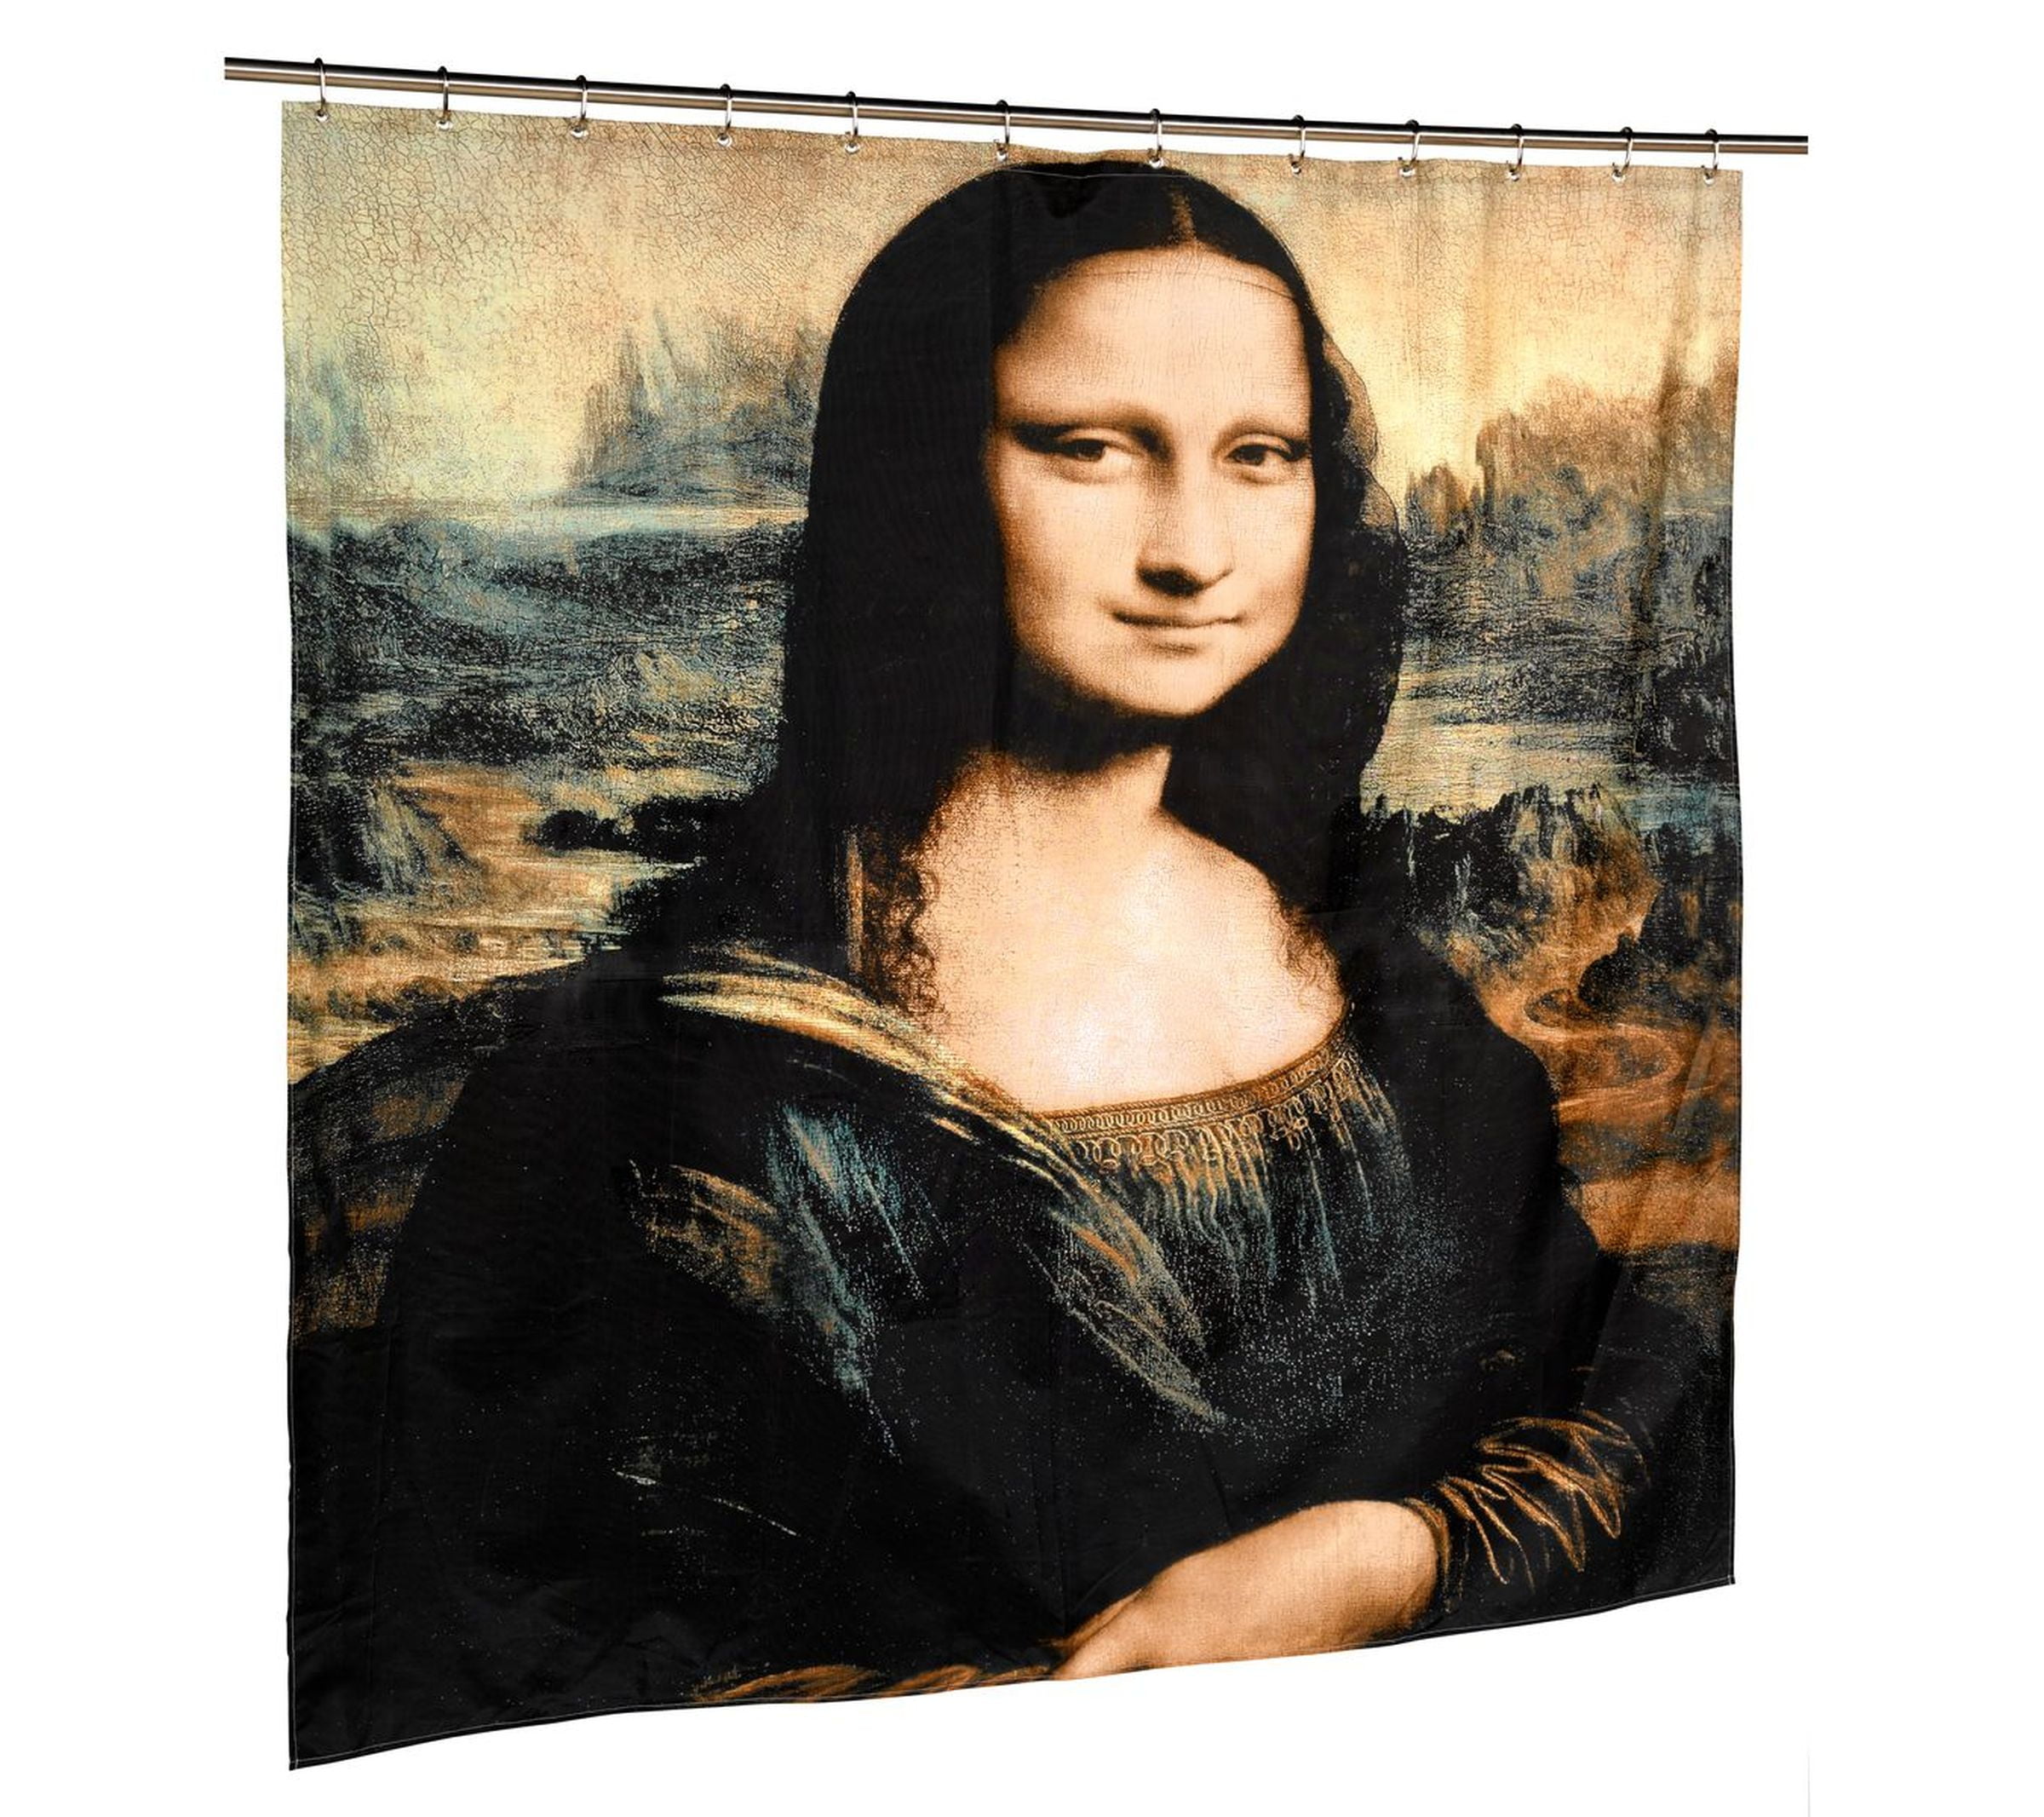 Carnation "Mona Lisa" Museum Collection Polyester Fabric Shower Curtain 70"x72" 